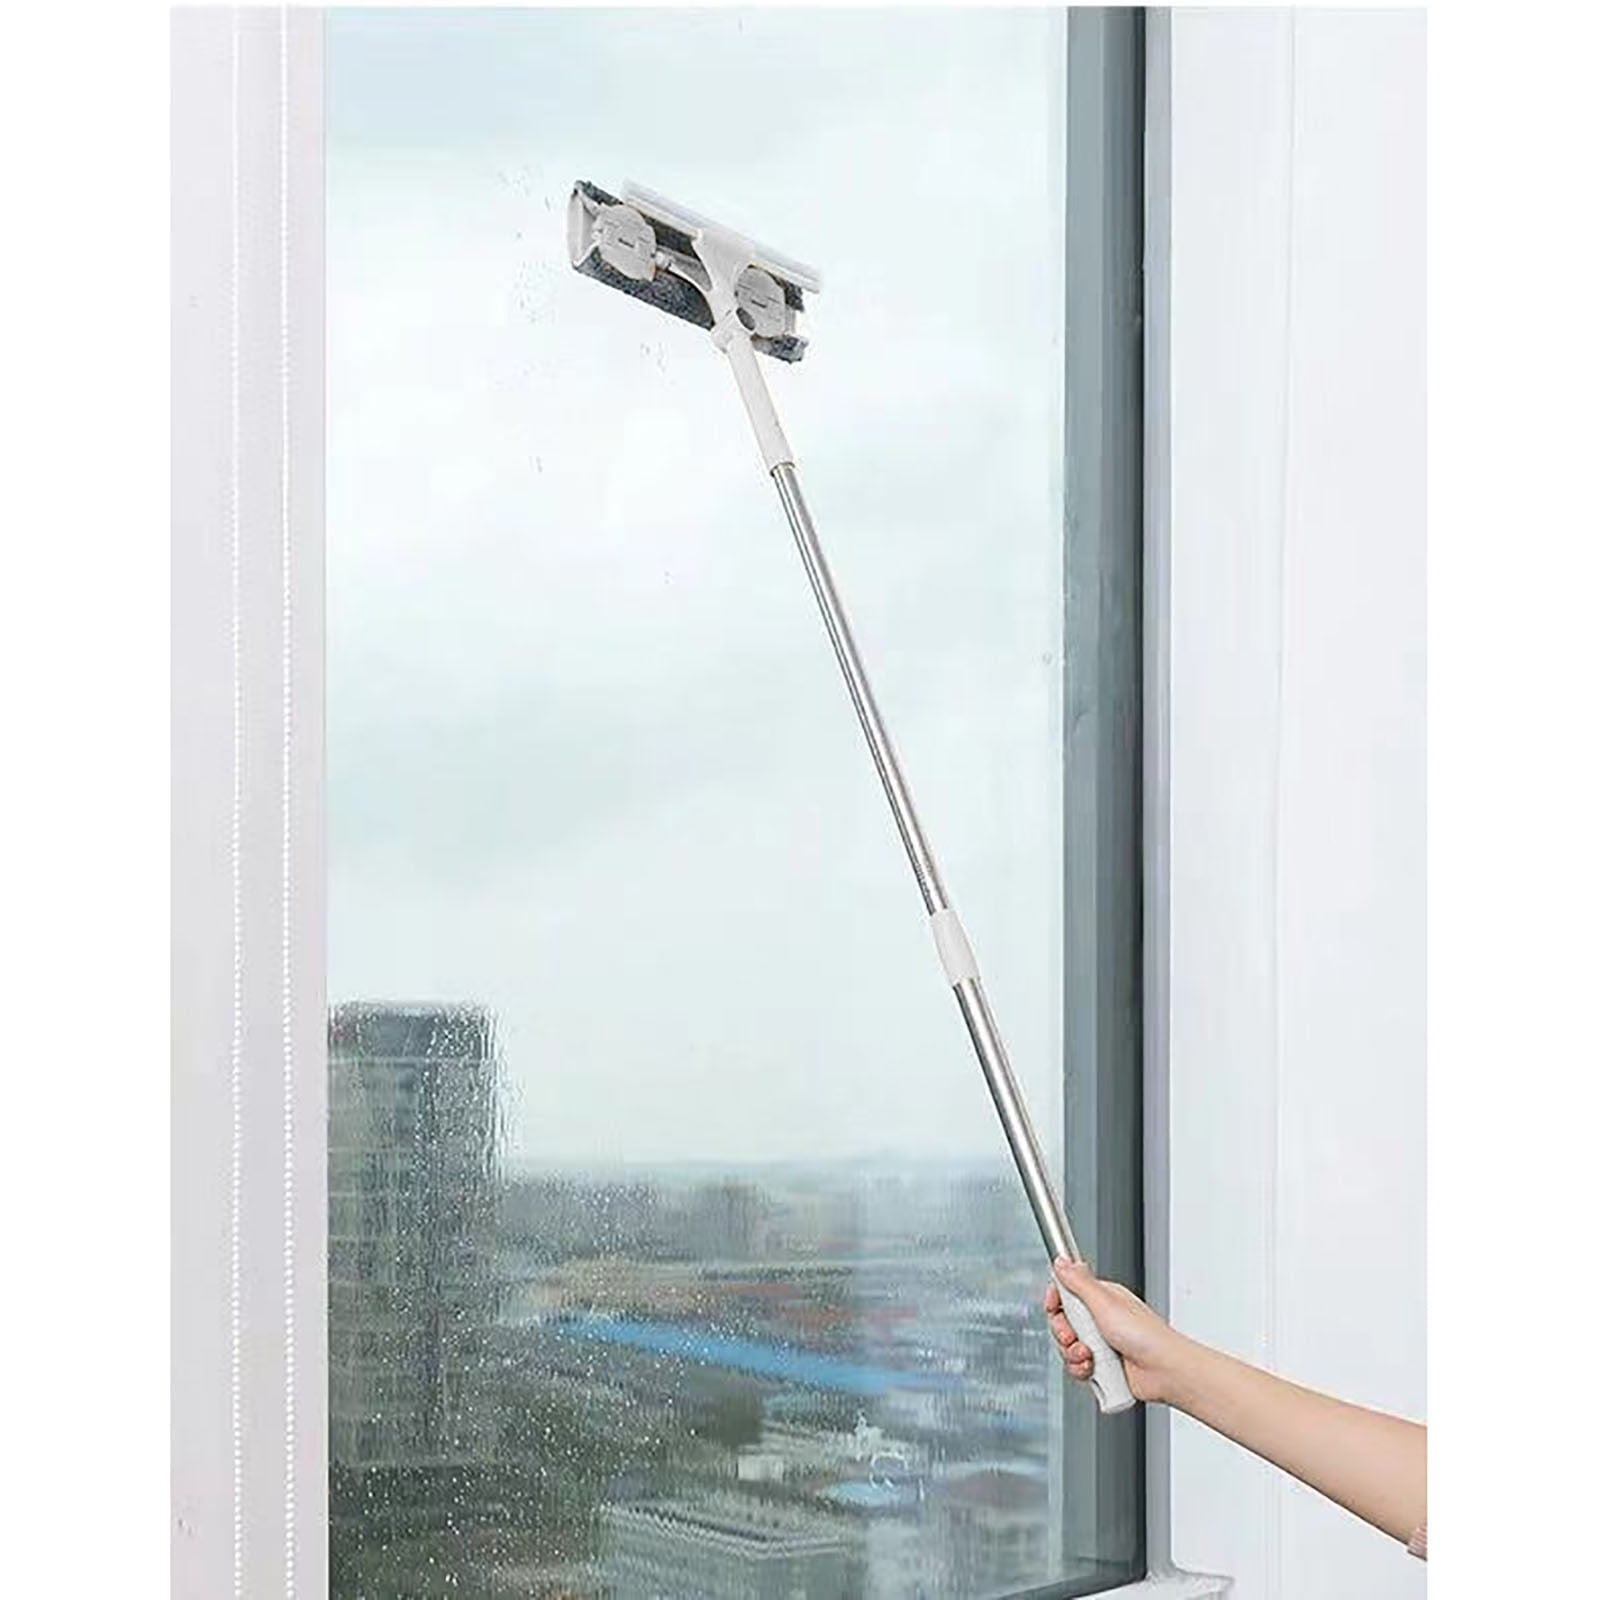 Squeegee for Window Cleaning with Spray, BOOMJOY Shower Cleaner Tool with  51 Adjustable Handle, Microfiber Scrubber with Extendable Pole for Shower